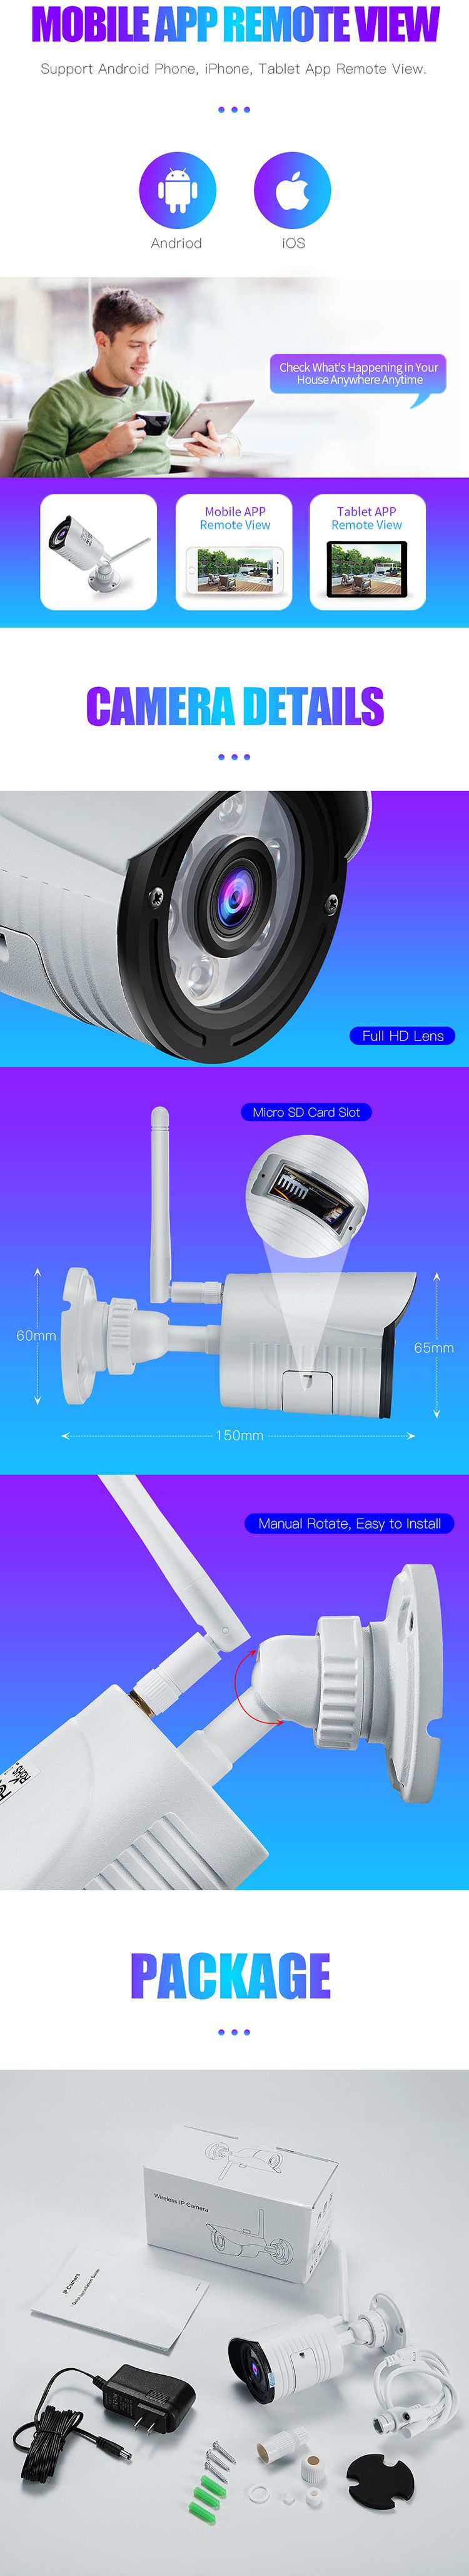 Wanscam-K22-1080P-WiFi-IP-Camera-Wireless-CCTV-2MP-Outdoor-Waterproof-Security-Camera-Support-64G-TF-1257350